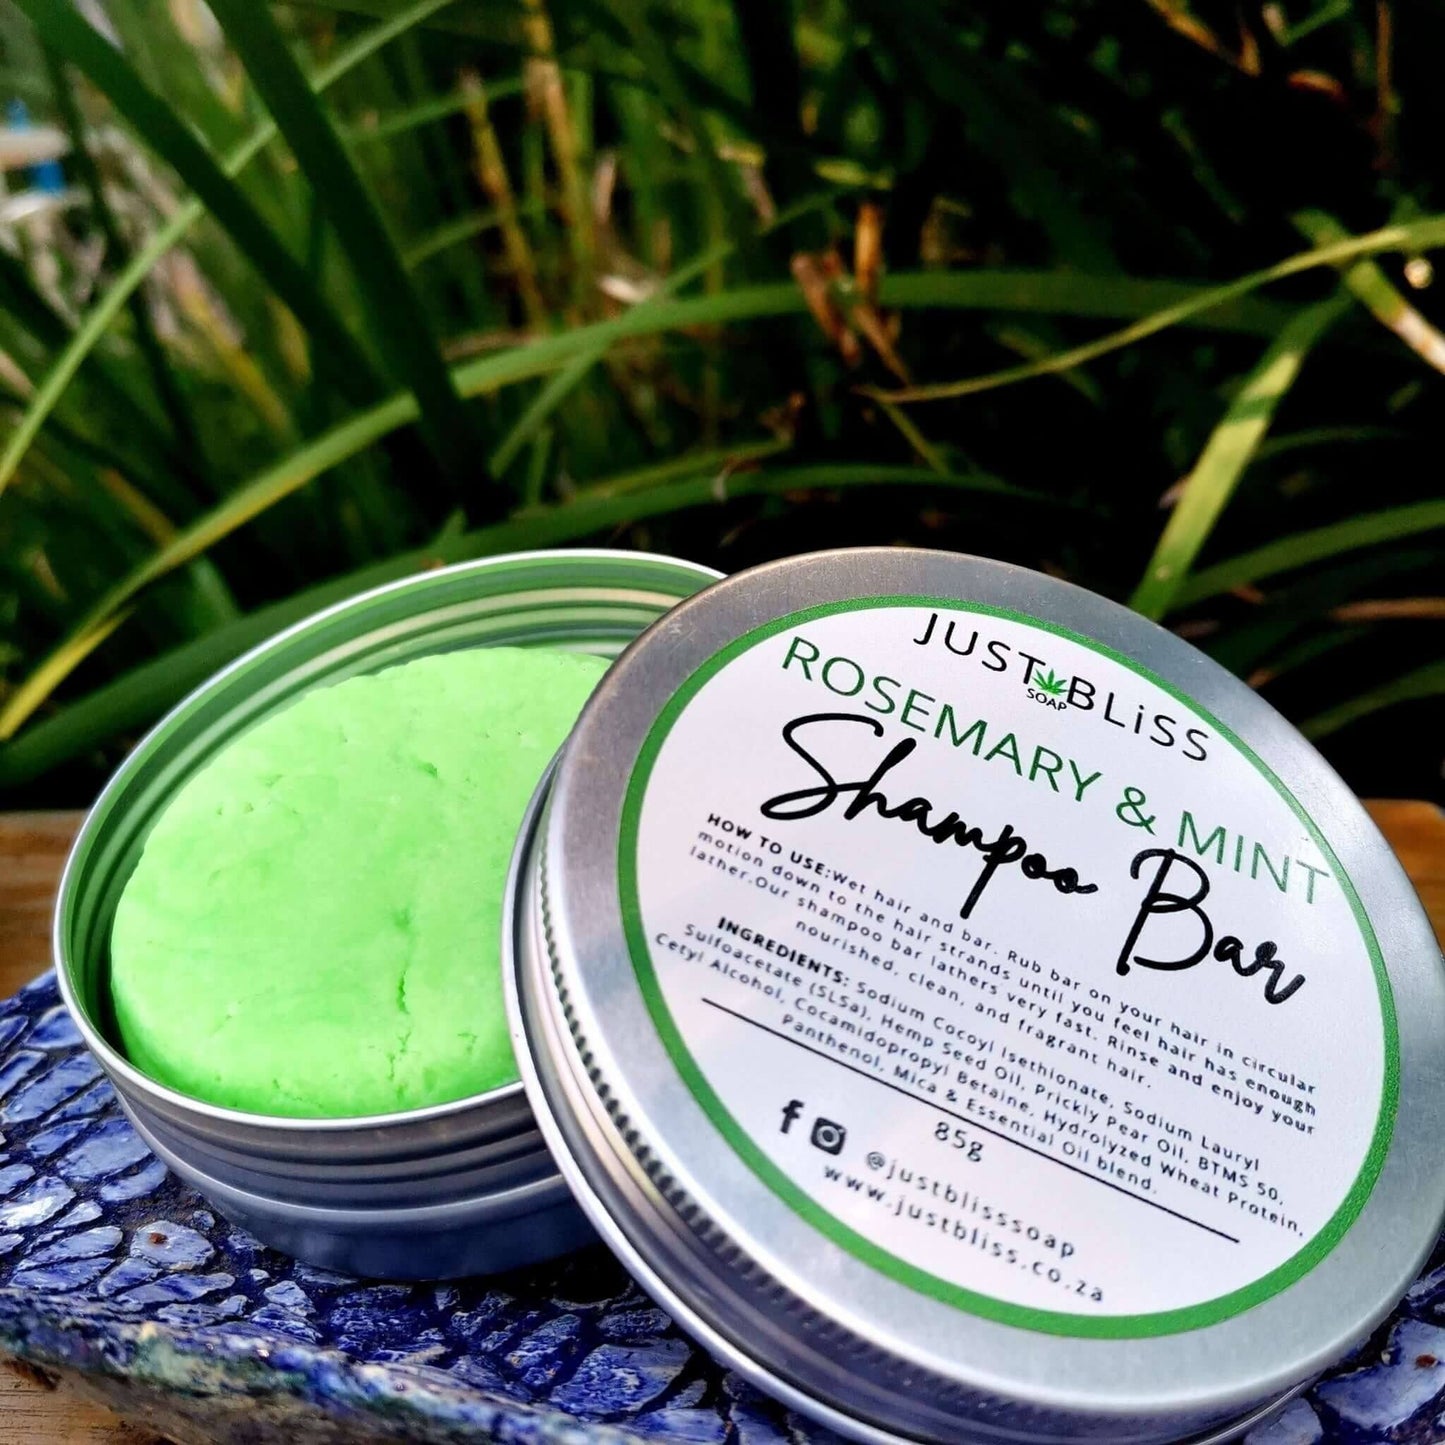  JUSTBLISS: SHAMPOO BAR in tin: rosemary and mint